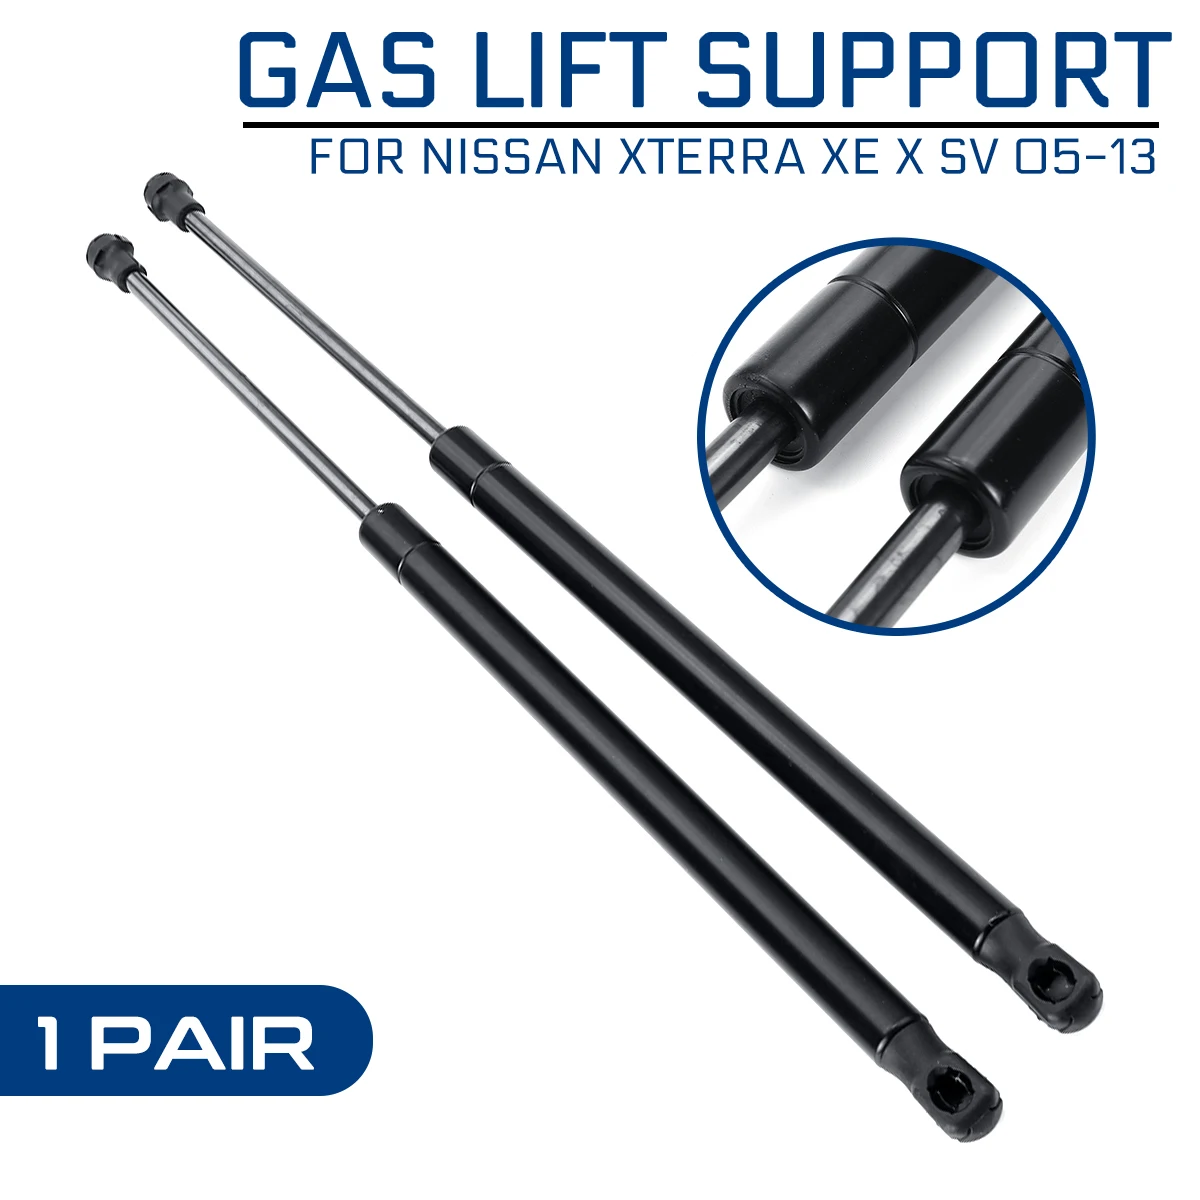 

Rear Trunk Tail Gate Tailgate Boot Gas Spring Shock Lift Struts Support Rod For Nissan Xterra XE X SV Off-Road Base Sport 05-13